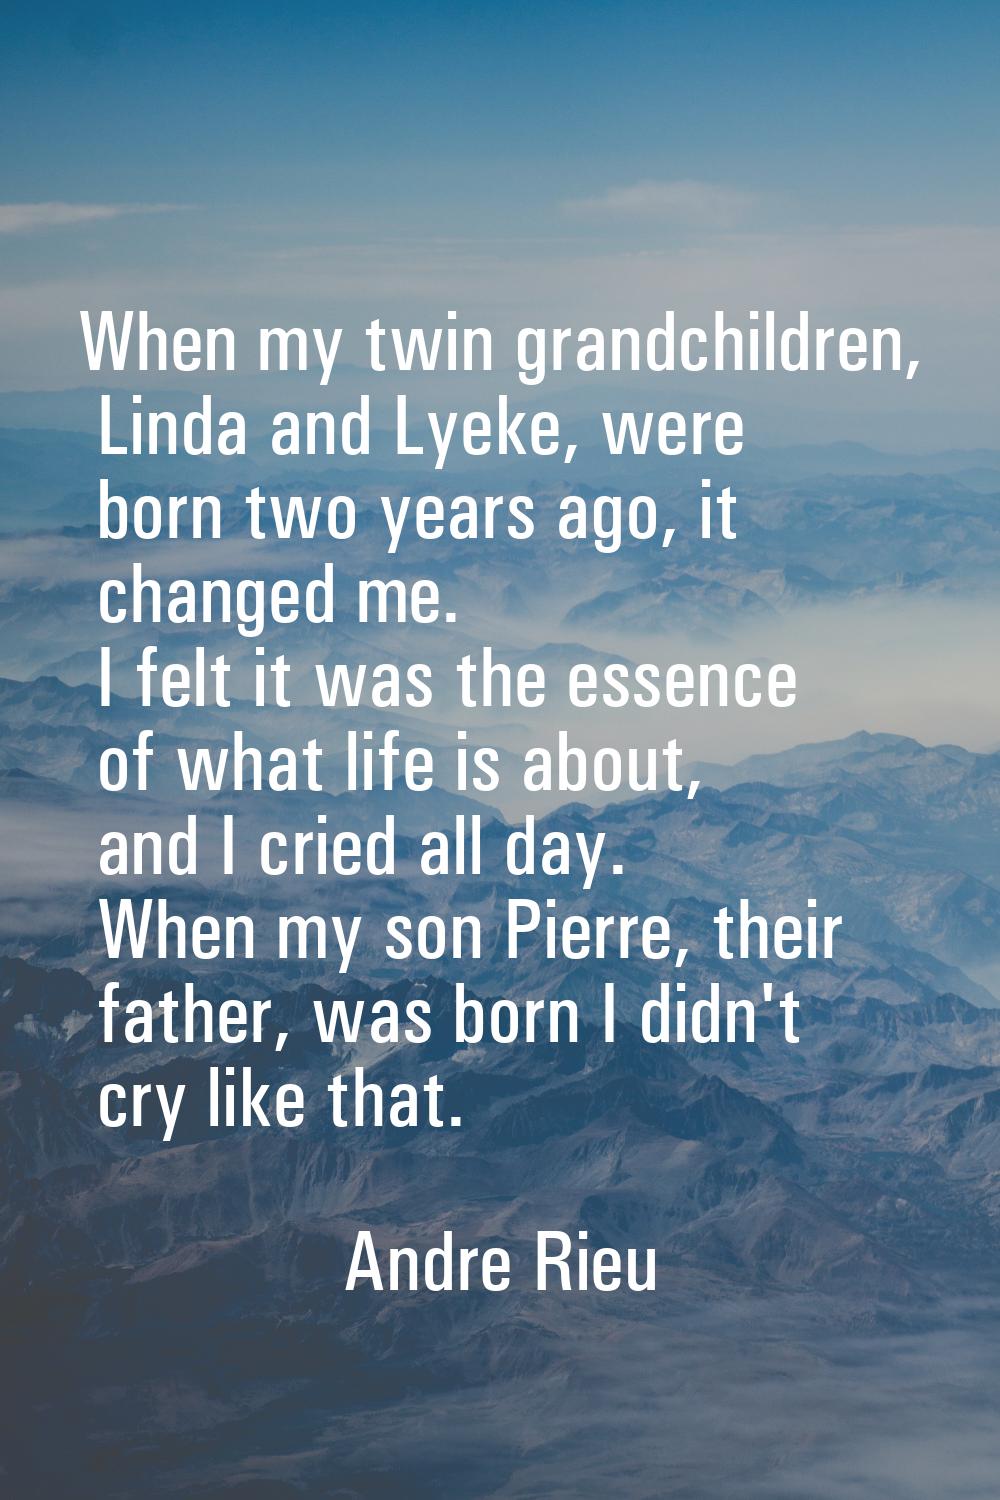 When my twin grandchildren, Linda and Lyeke, were born two years ago, it changed me. I felt it was 